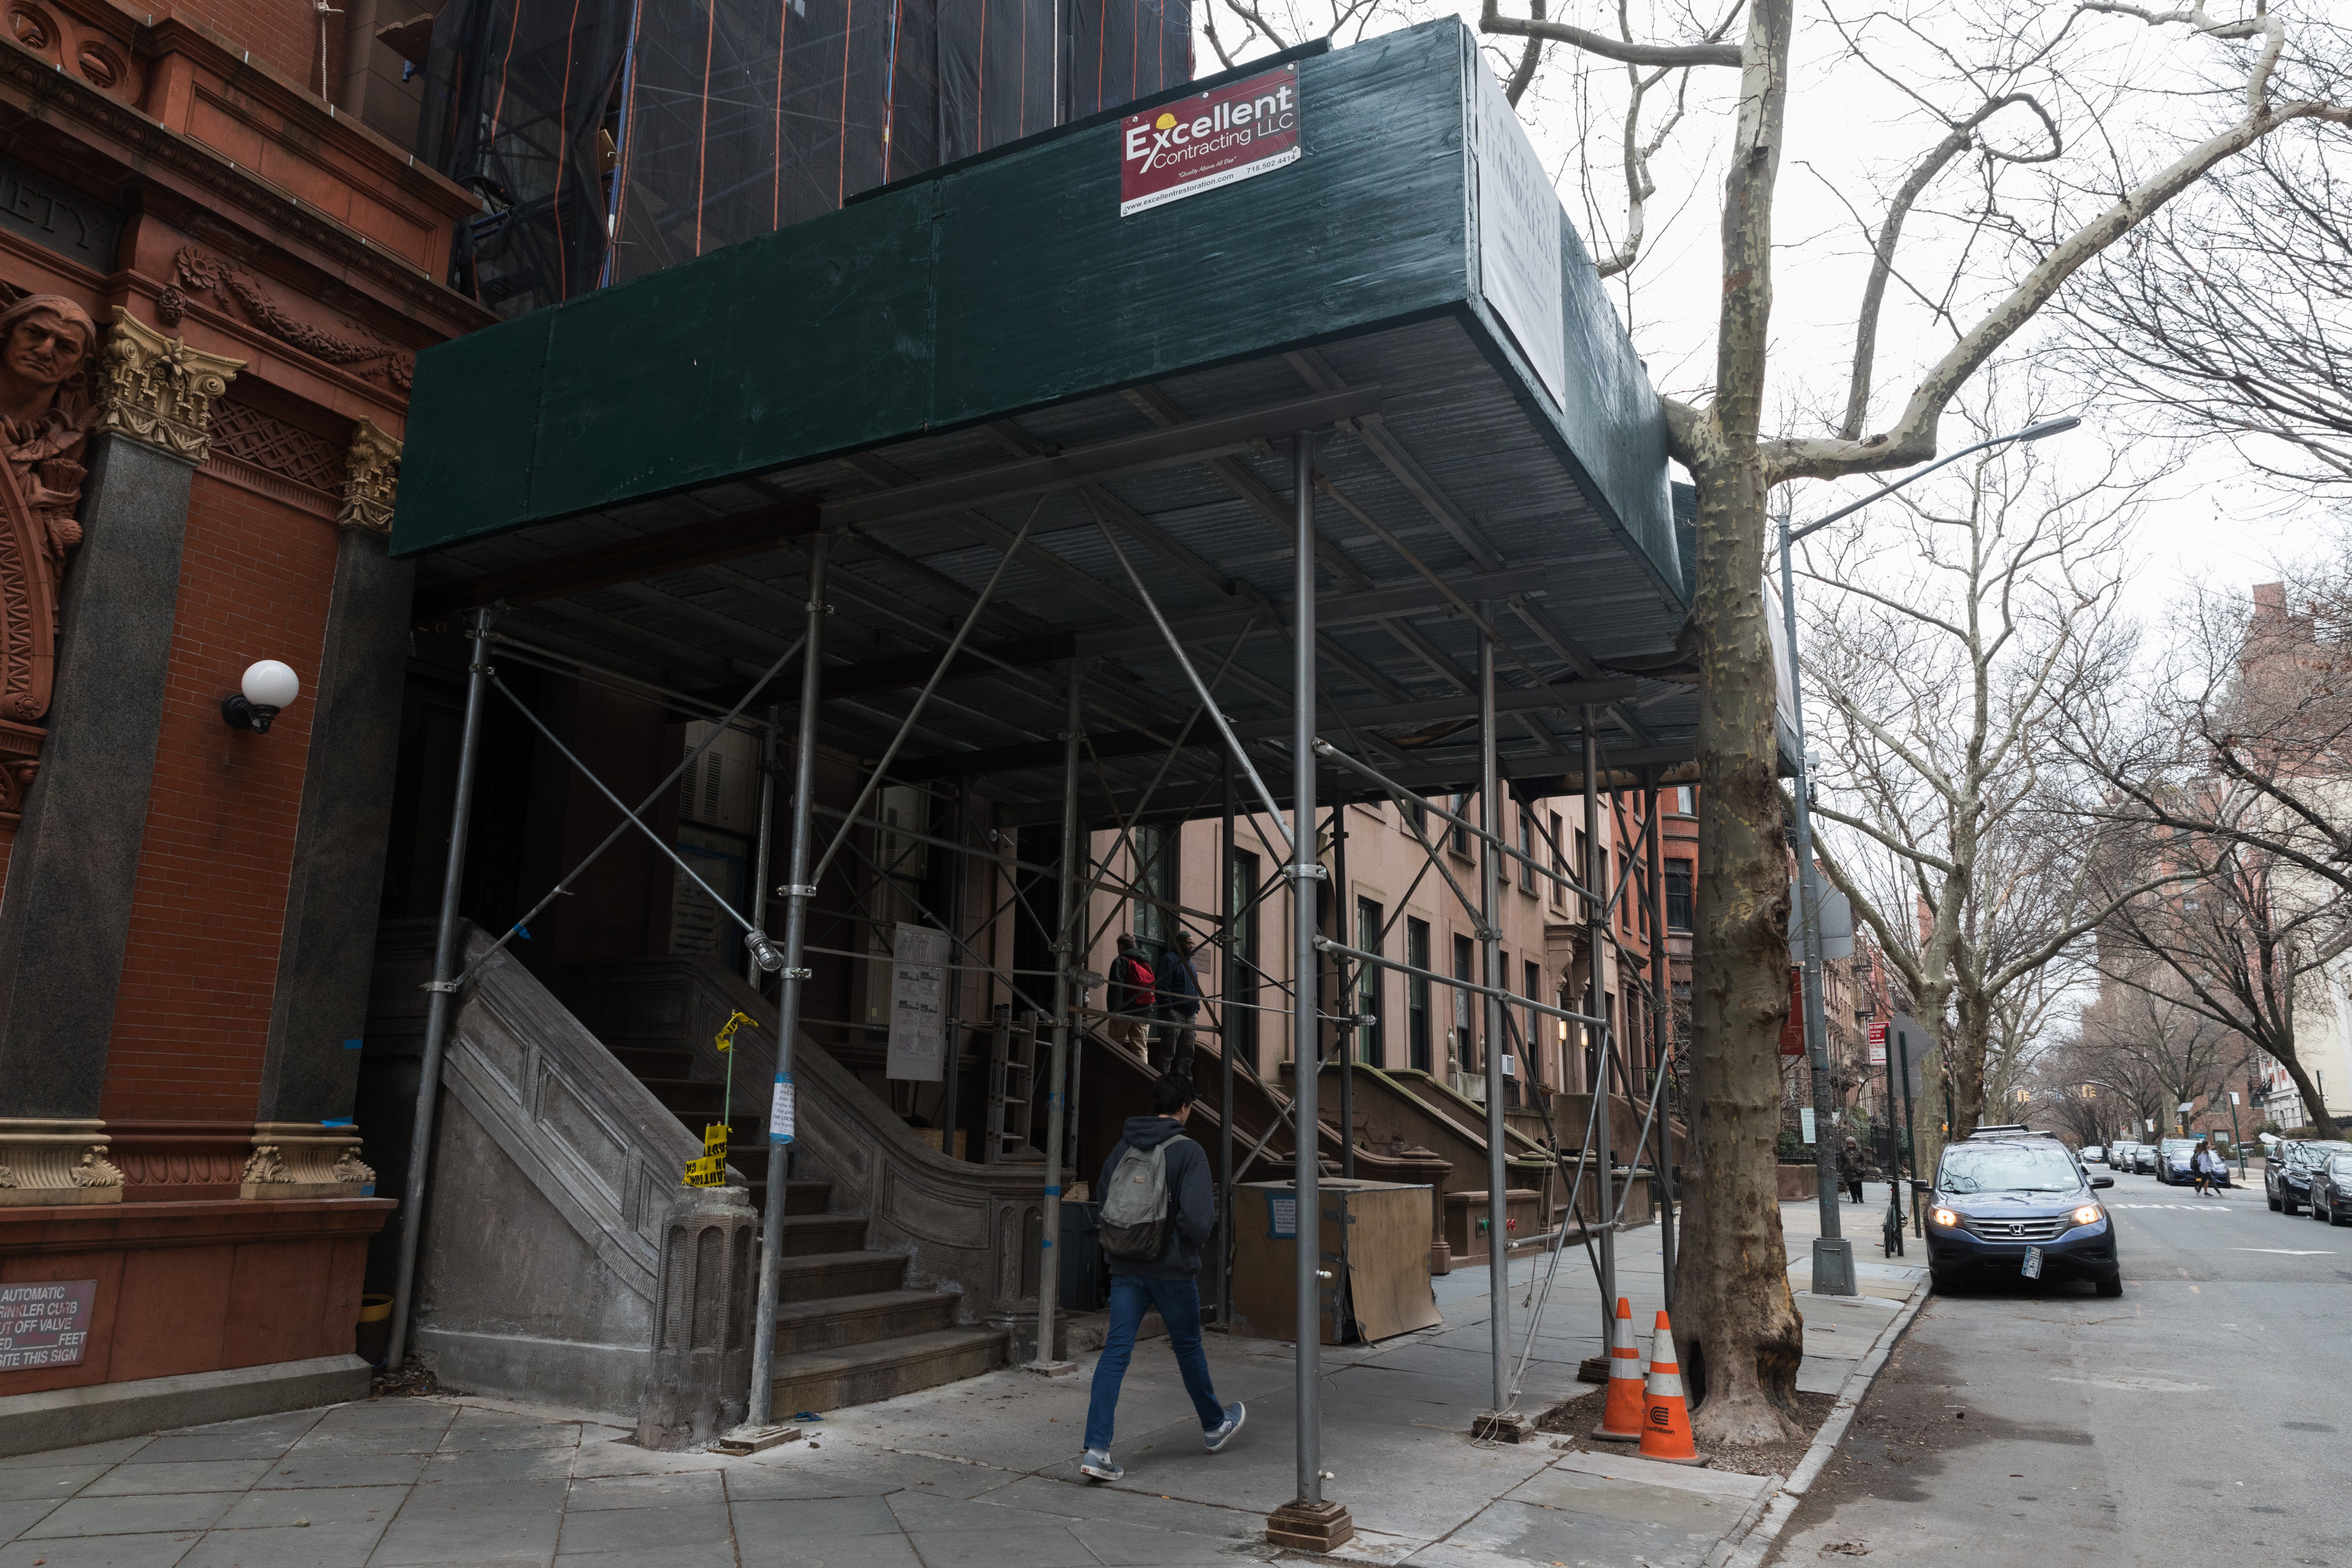 This sidewalk shed can be found on Pierrepont Street in Brooklyn Heights. Photo: Paul Frangipane/Brooklyn Eagle